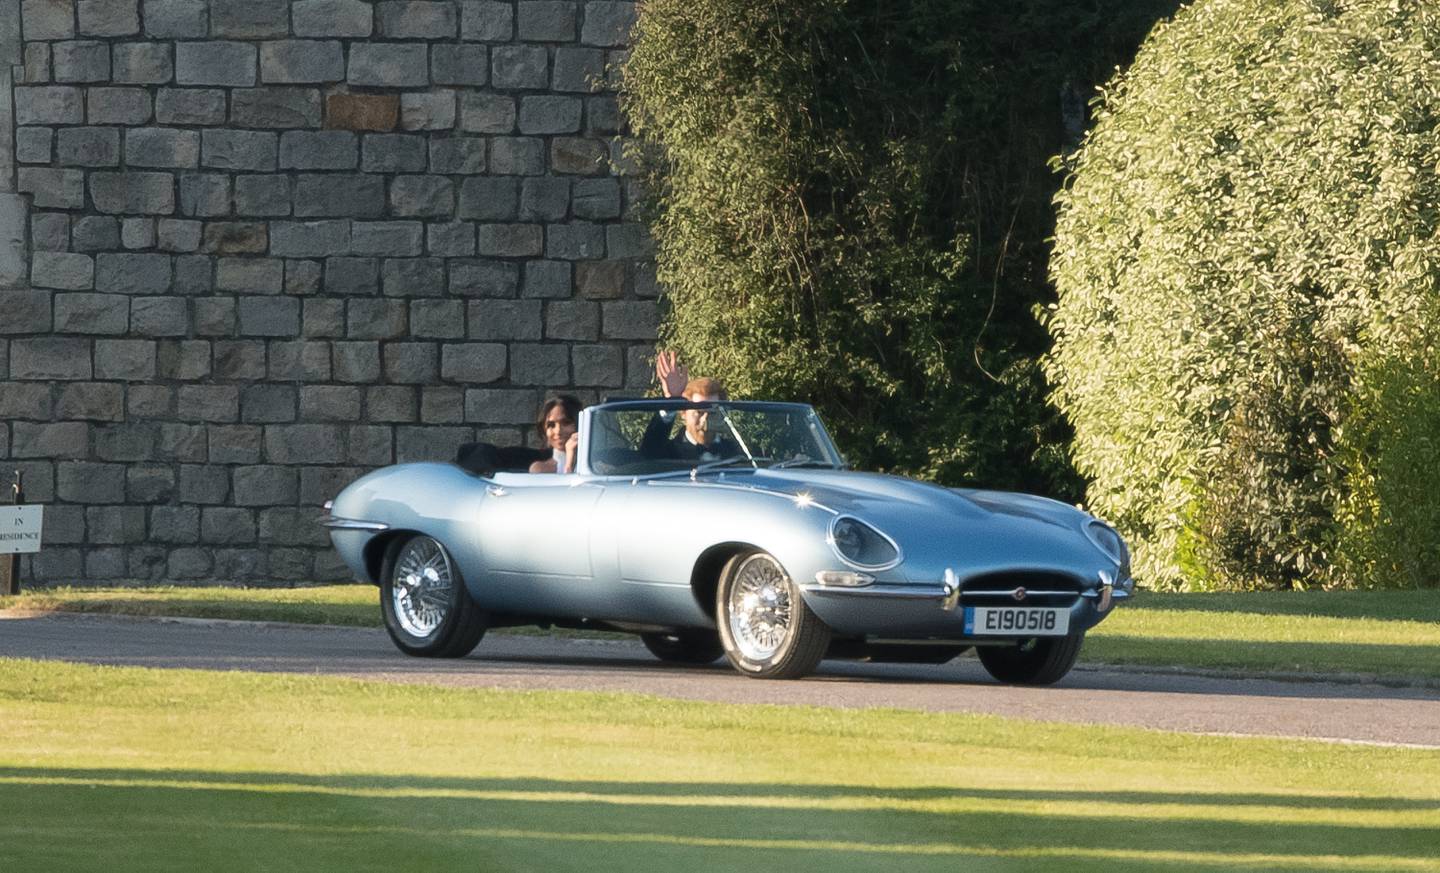 Prince Harry and Meghan Markle leave Windsor Castle in an E-Type Jaguar after their wedding. Getty Images